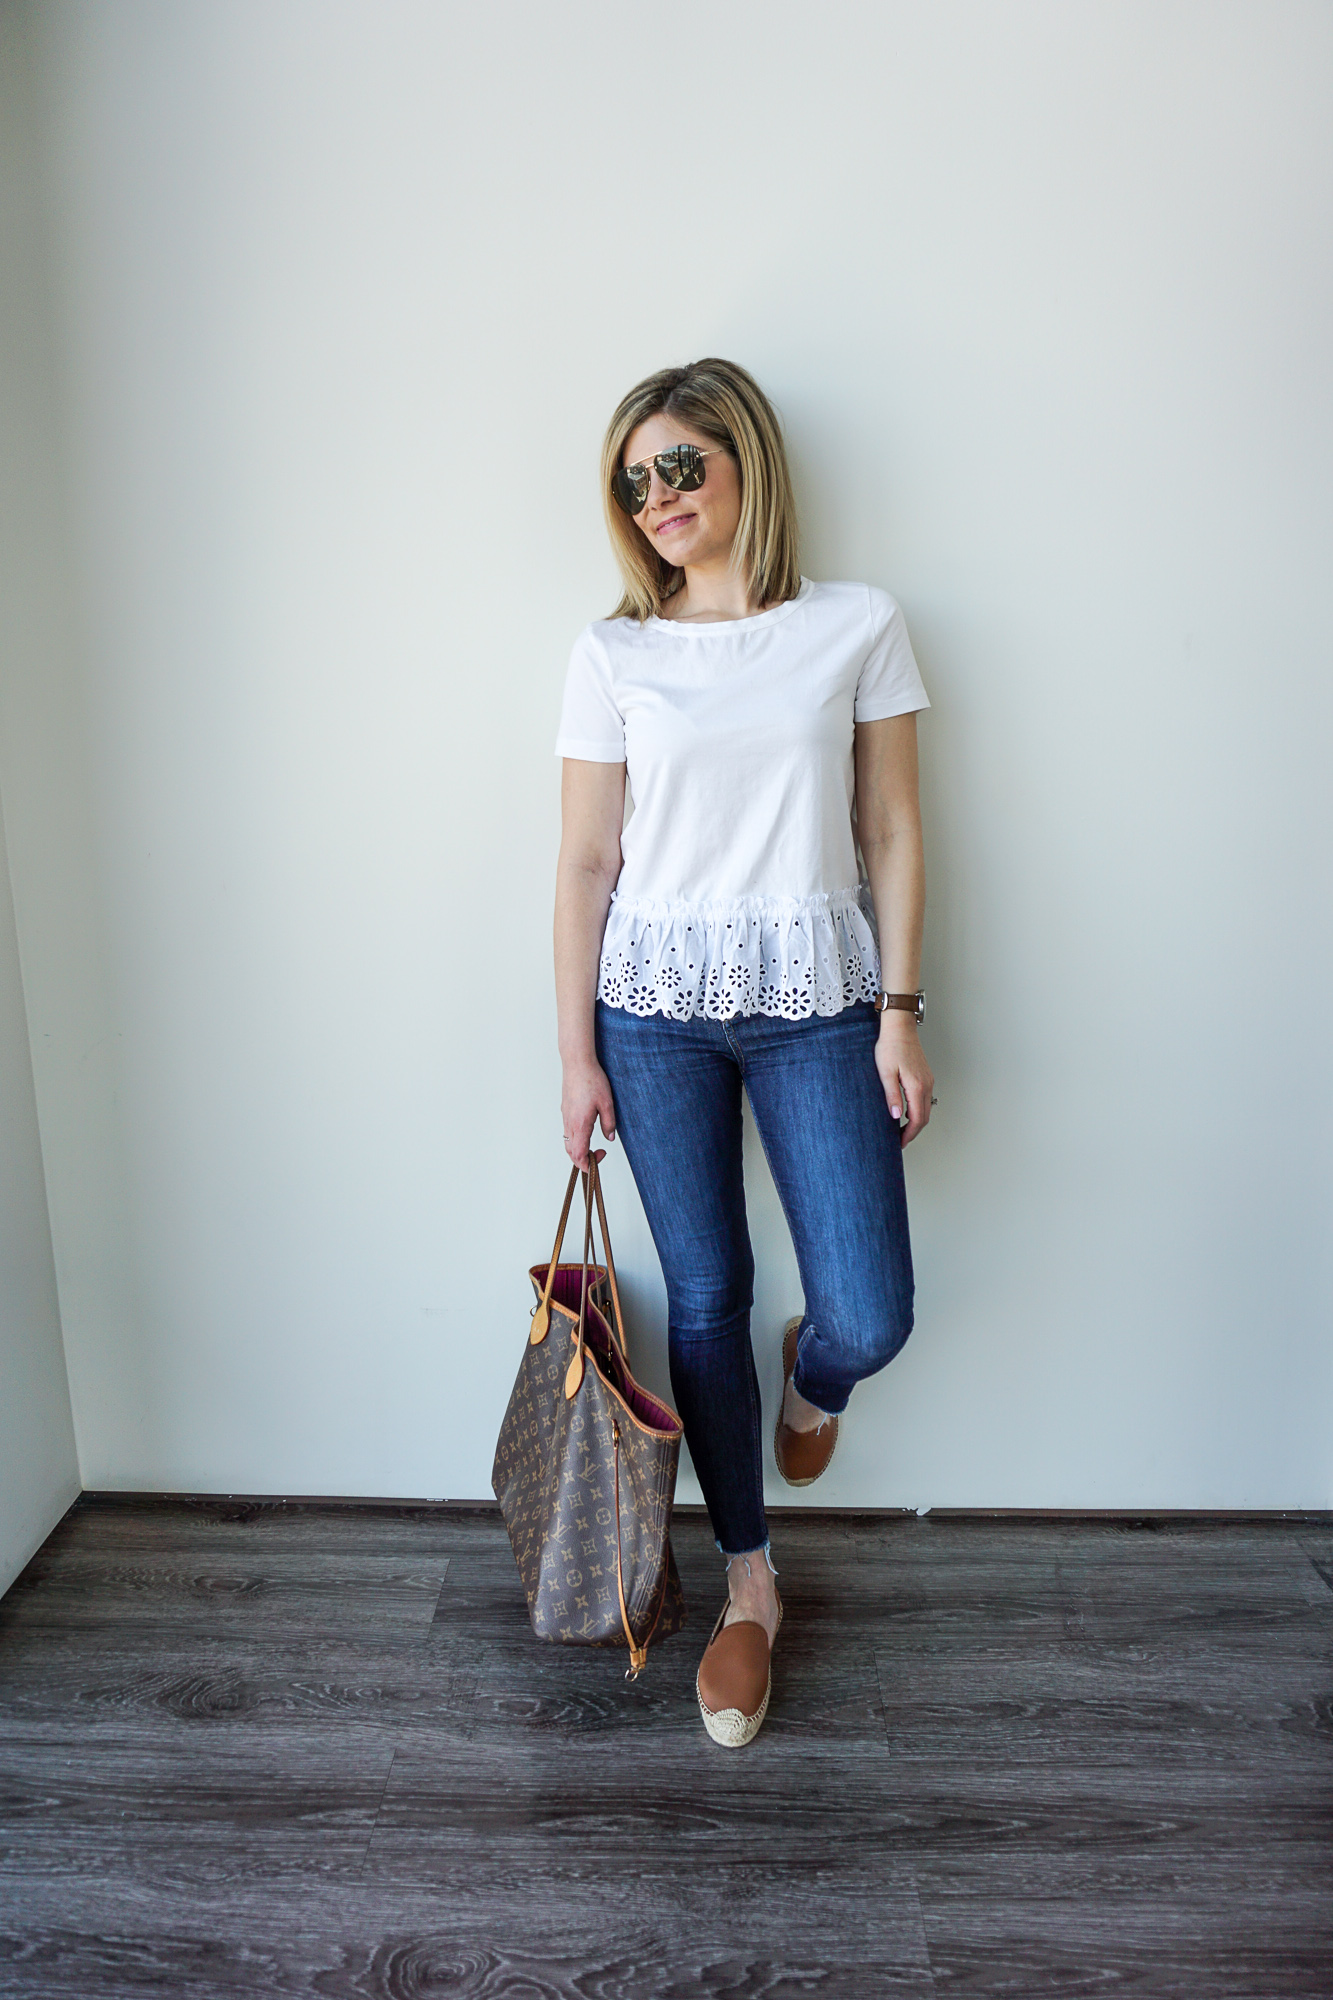 eyelet top and jeans